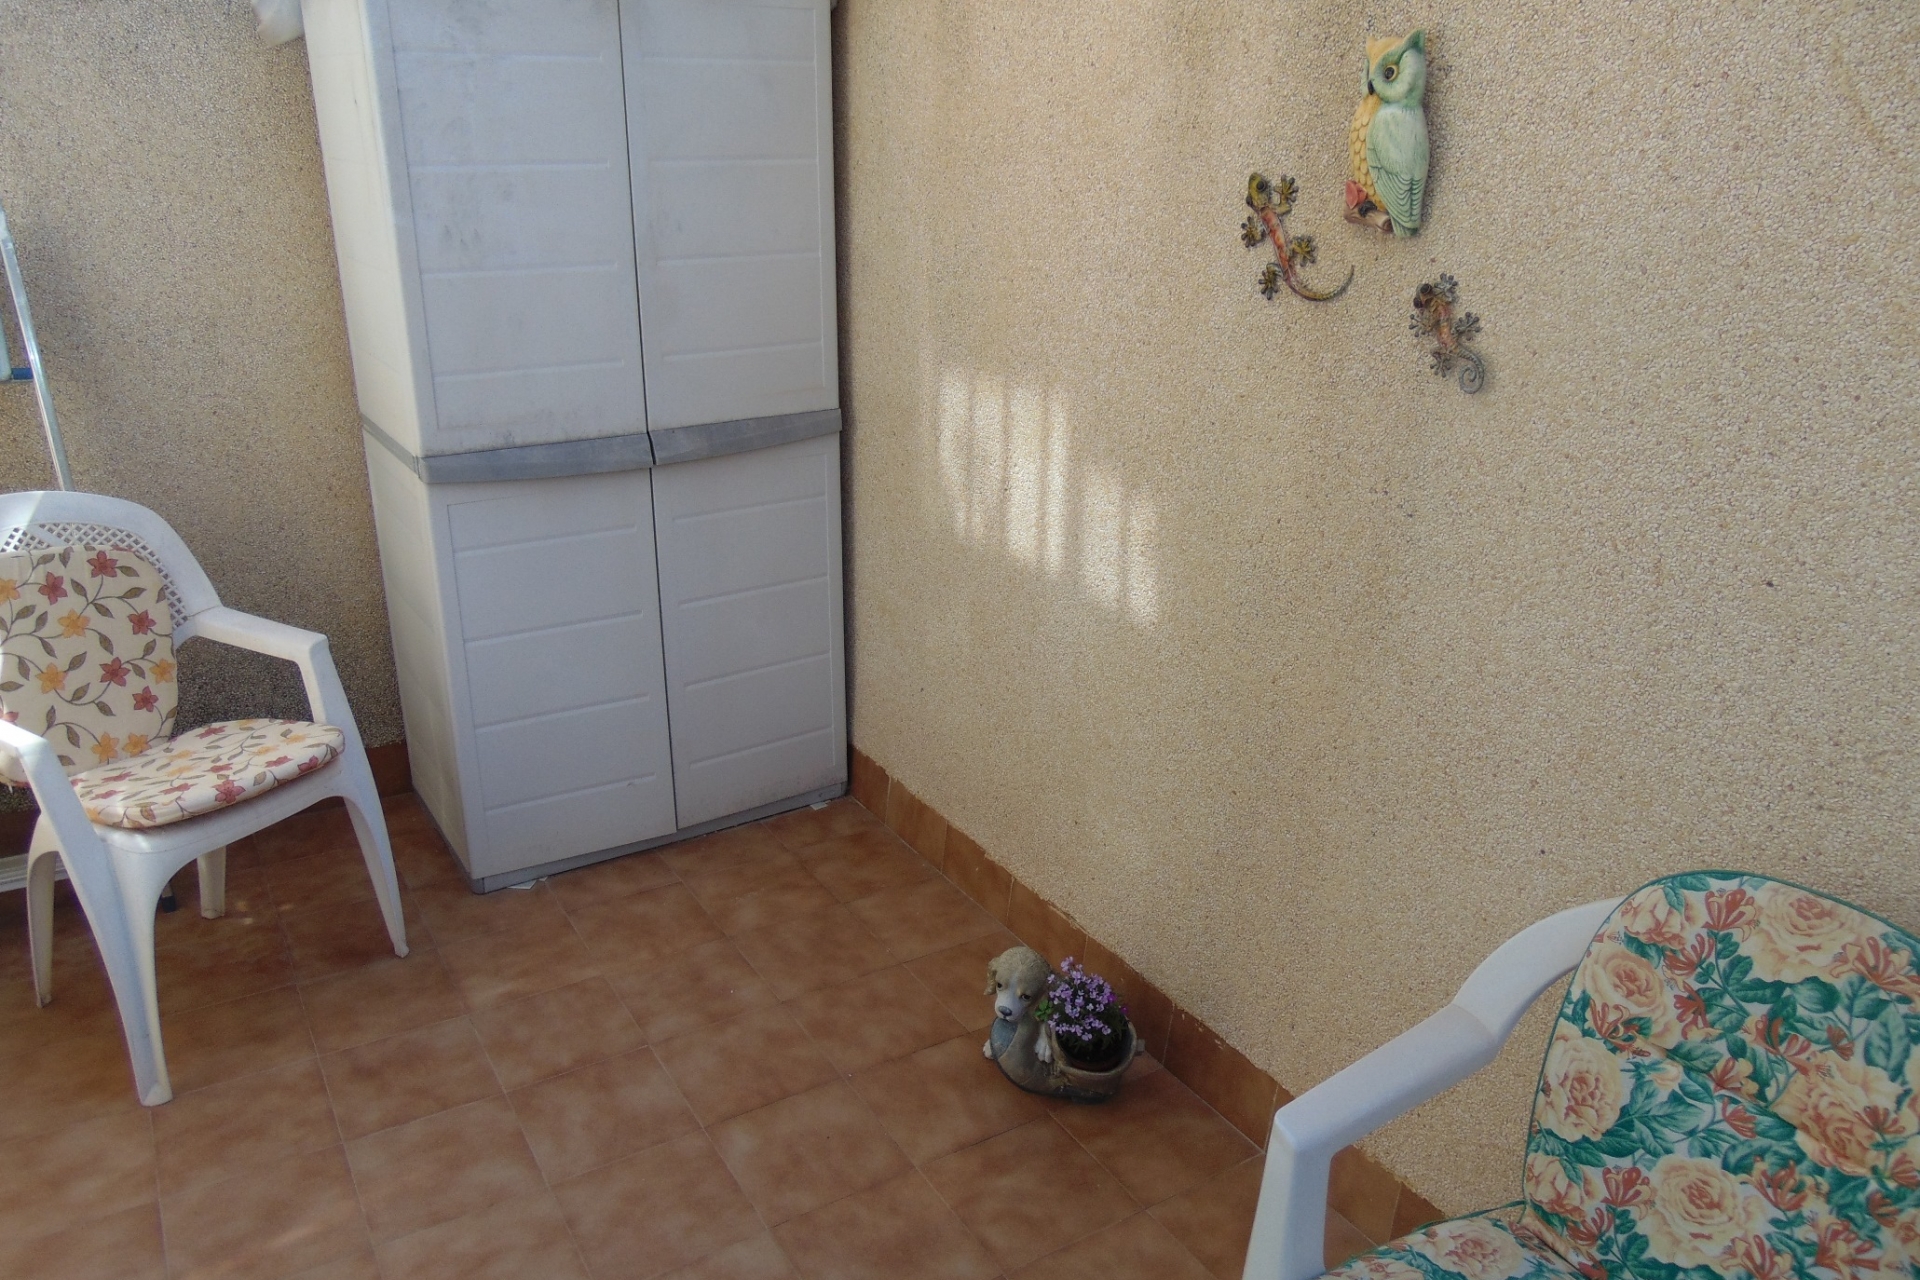 Property Sold - Townhouse for sale - Orihuela Costa - Las Filipinas